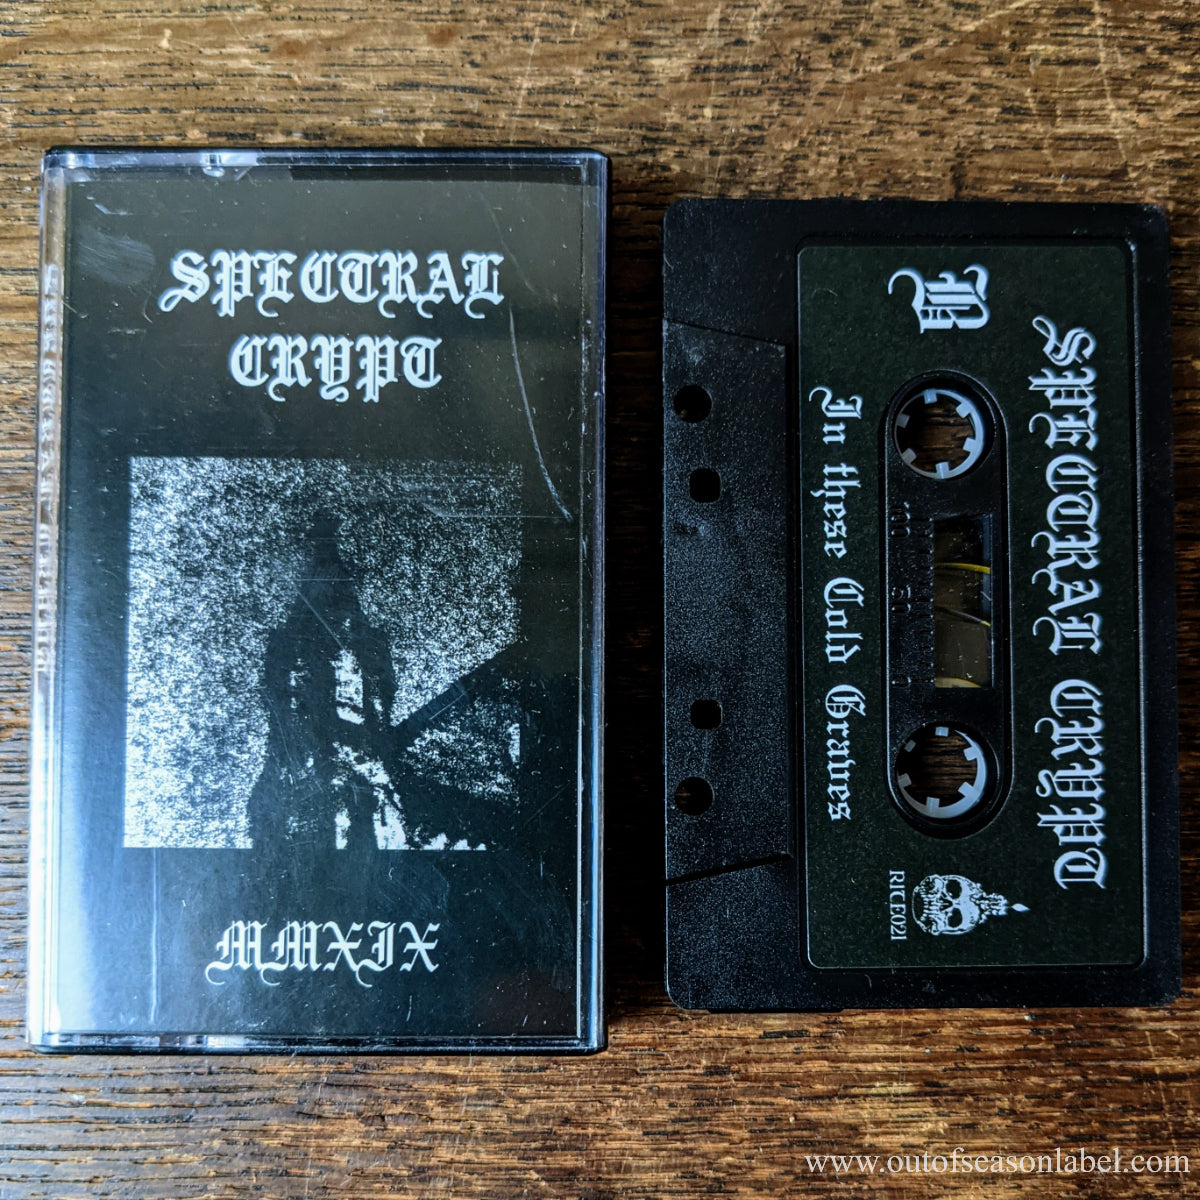 [SOLD OUT] SPECTRAL CRYPT "MMXIX" Cassette Tape (Lim. 75)